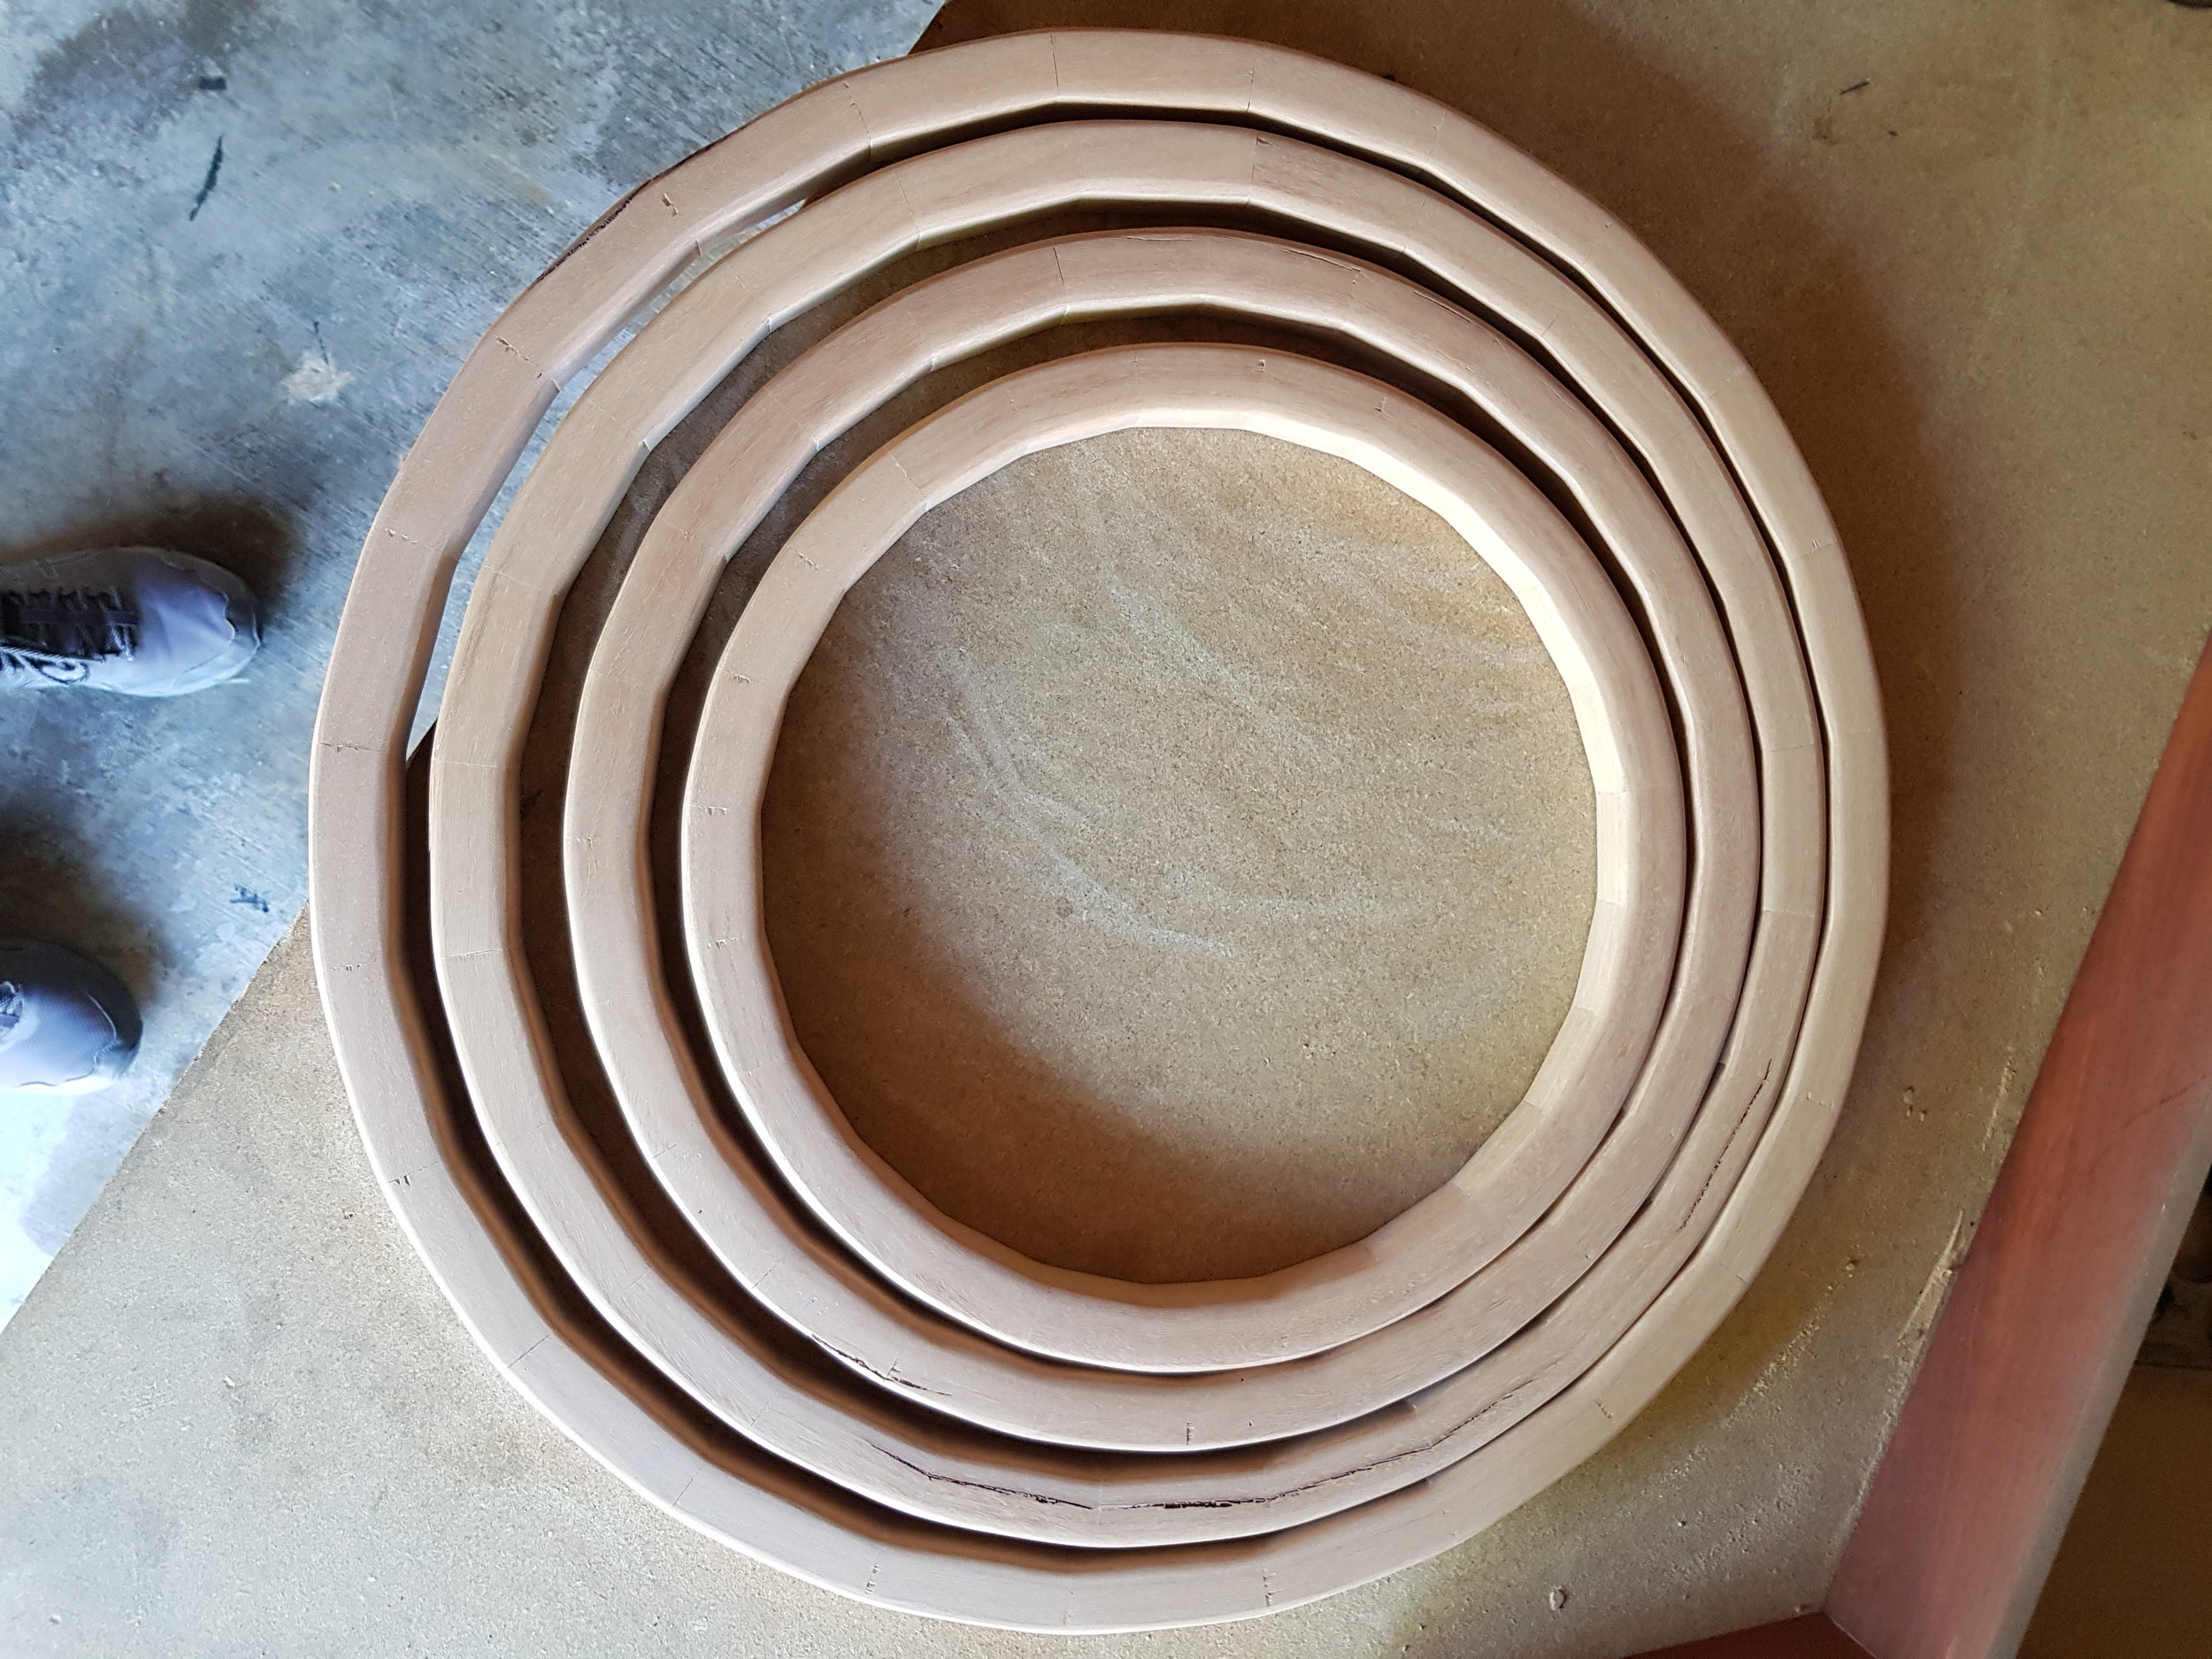 Rings sanded round